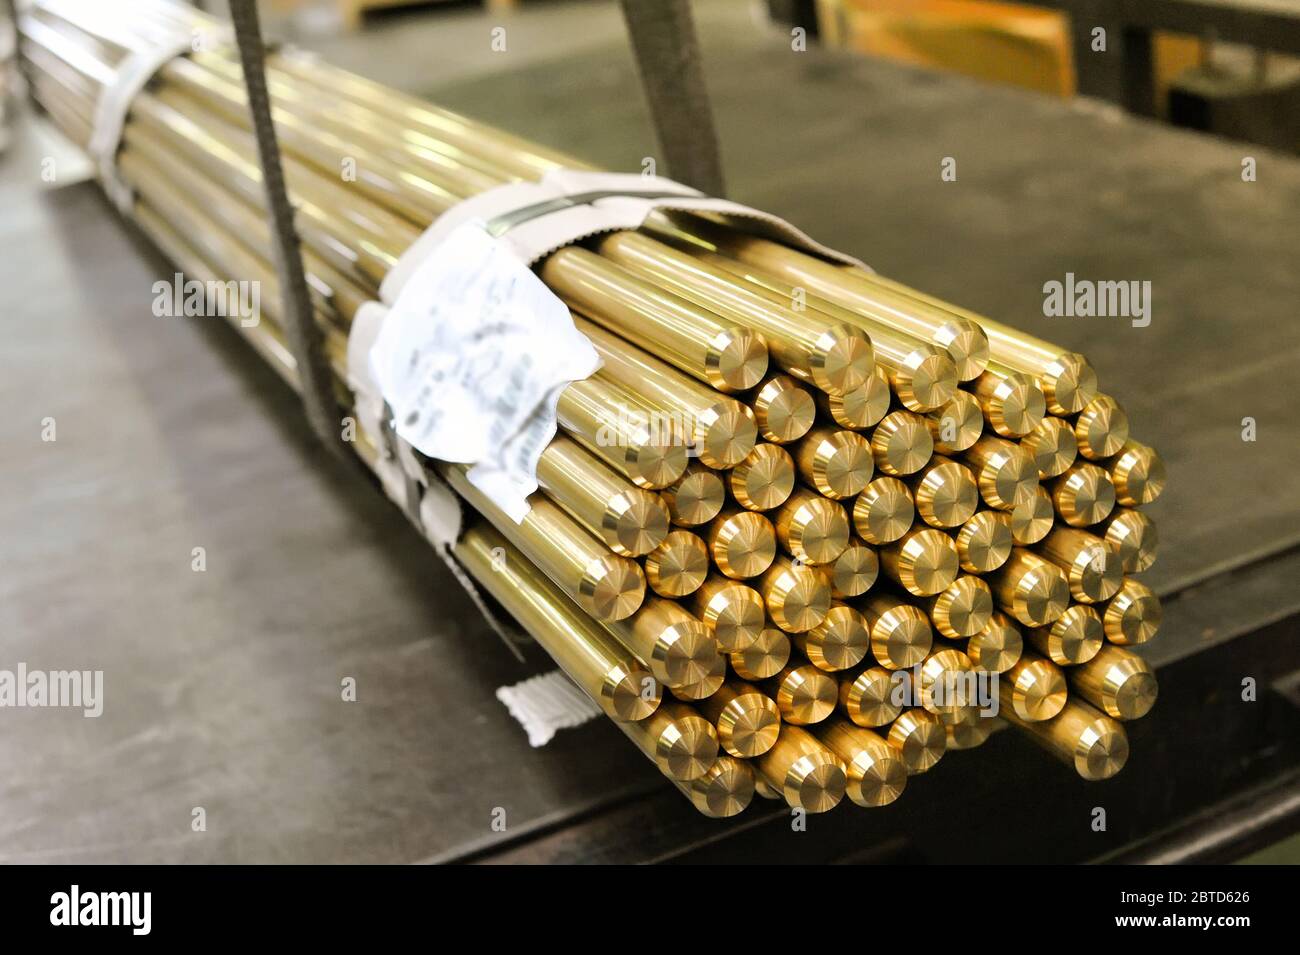 Bundle of bright shiny industrial brass rods in a market tied together with product information slip in close up on the ends Stock Photo